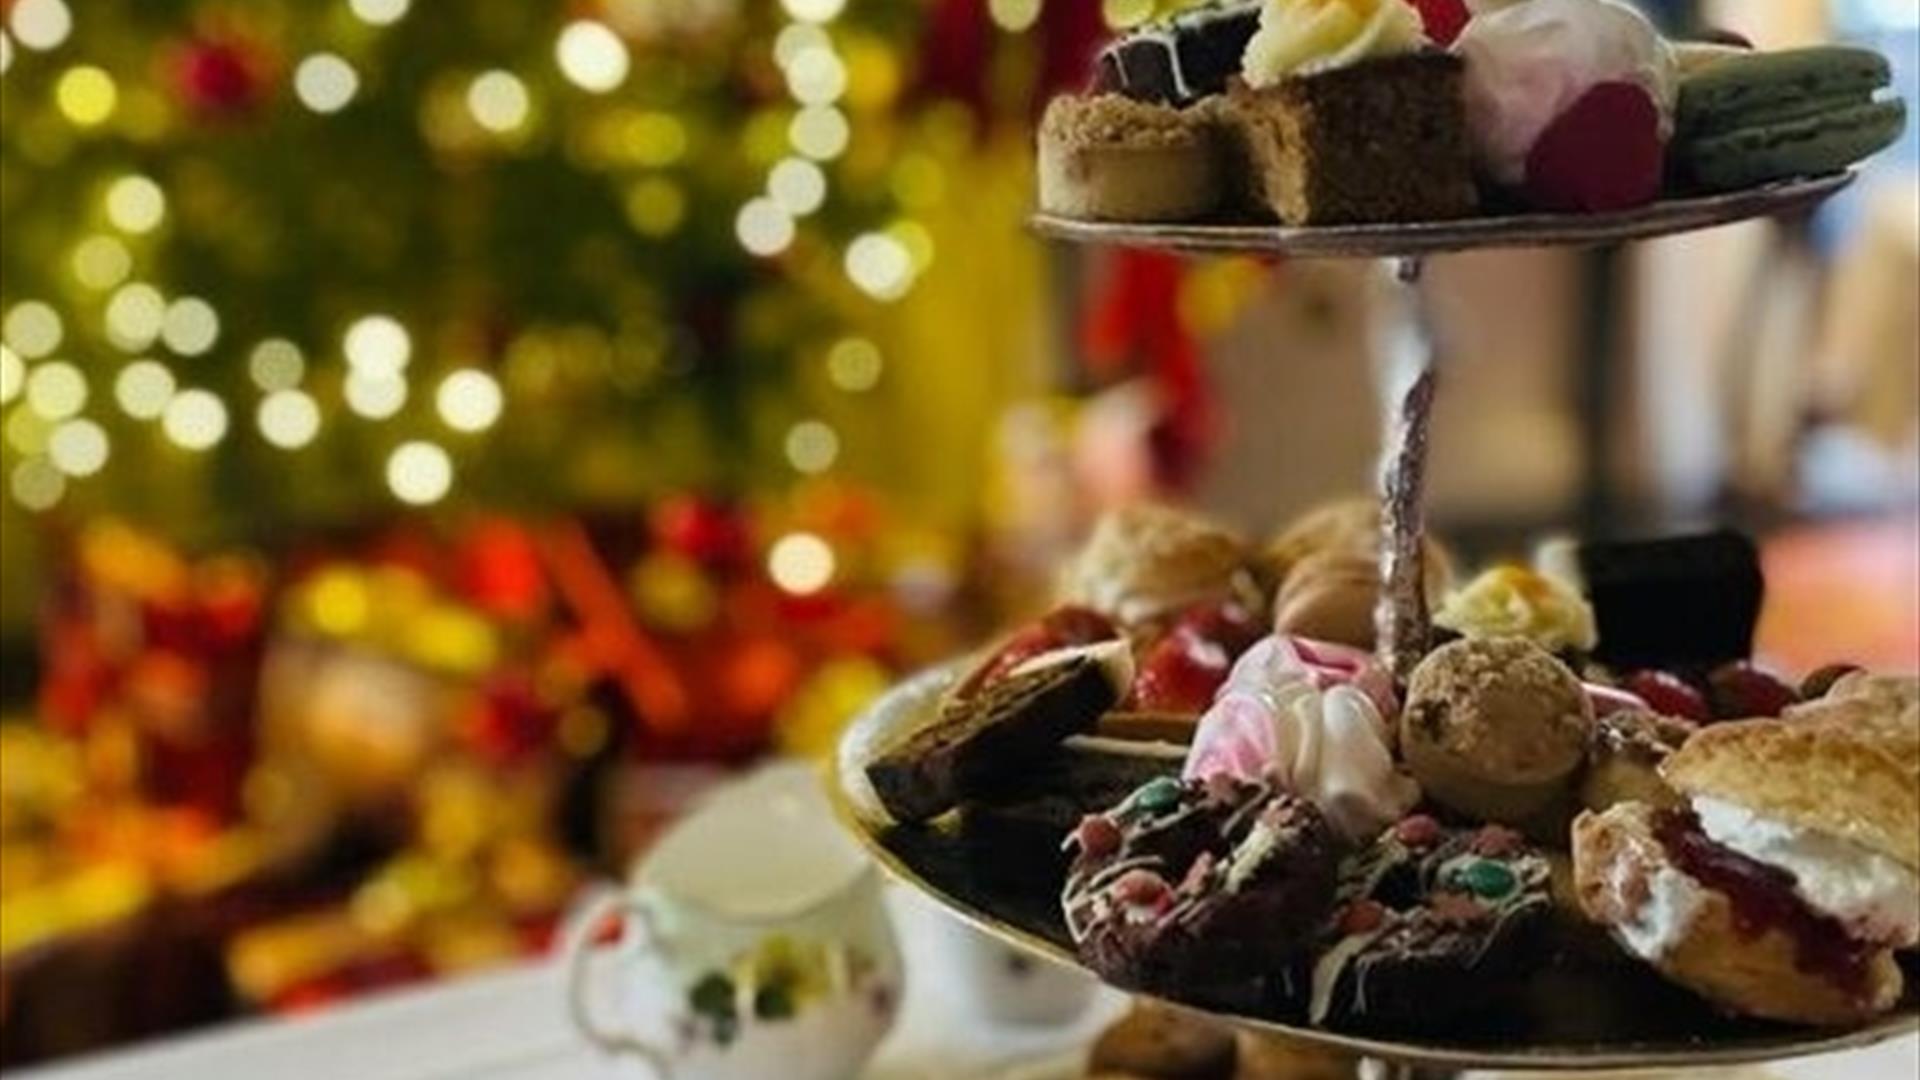 A close up of an afternoon tea with a Christmas tree in the background